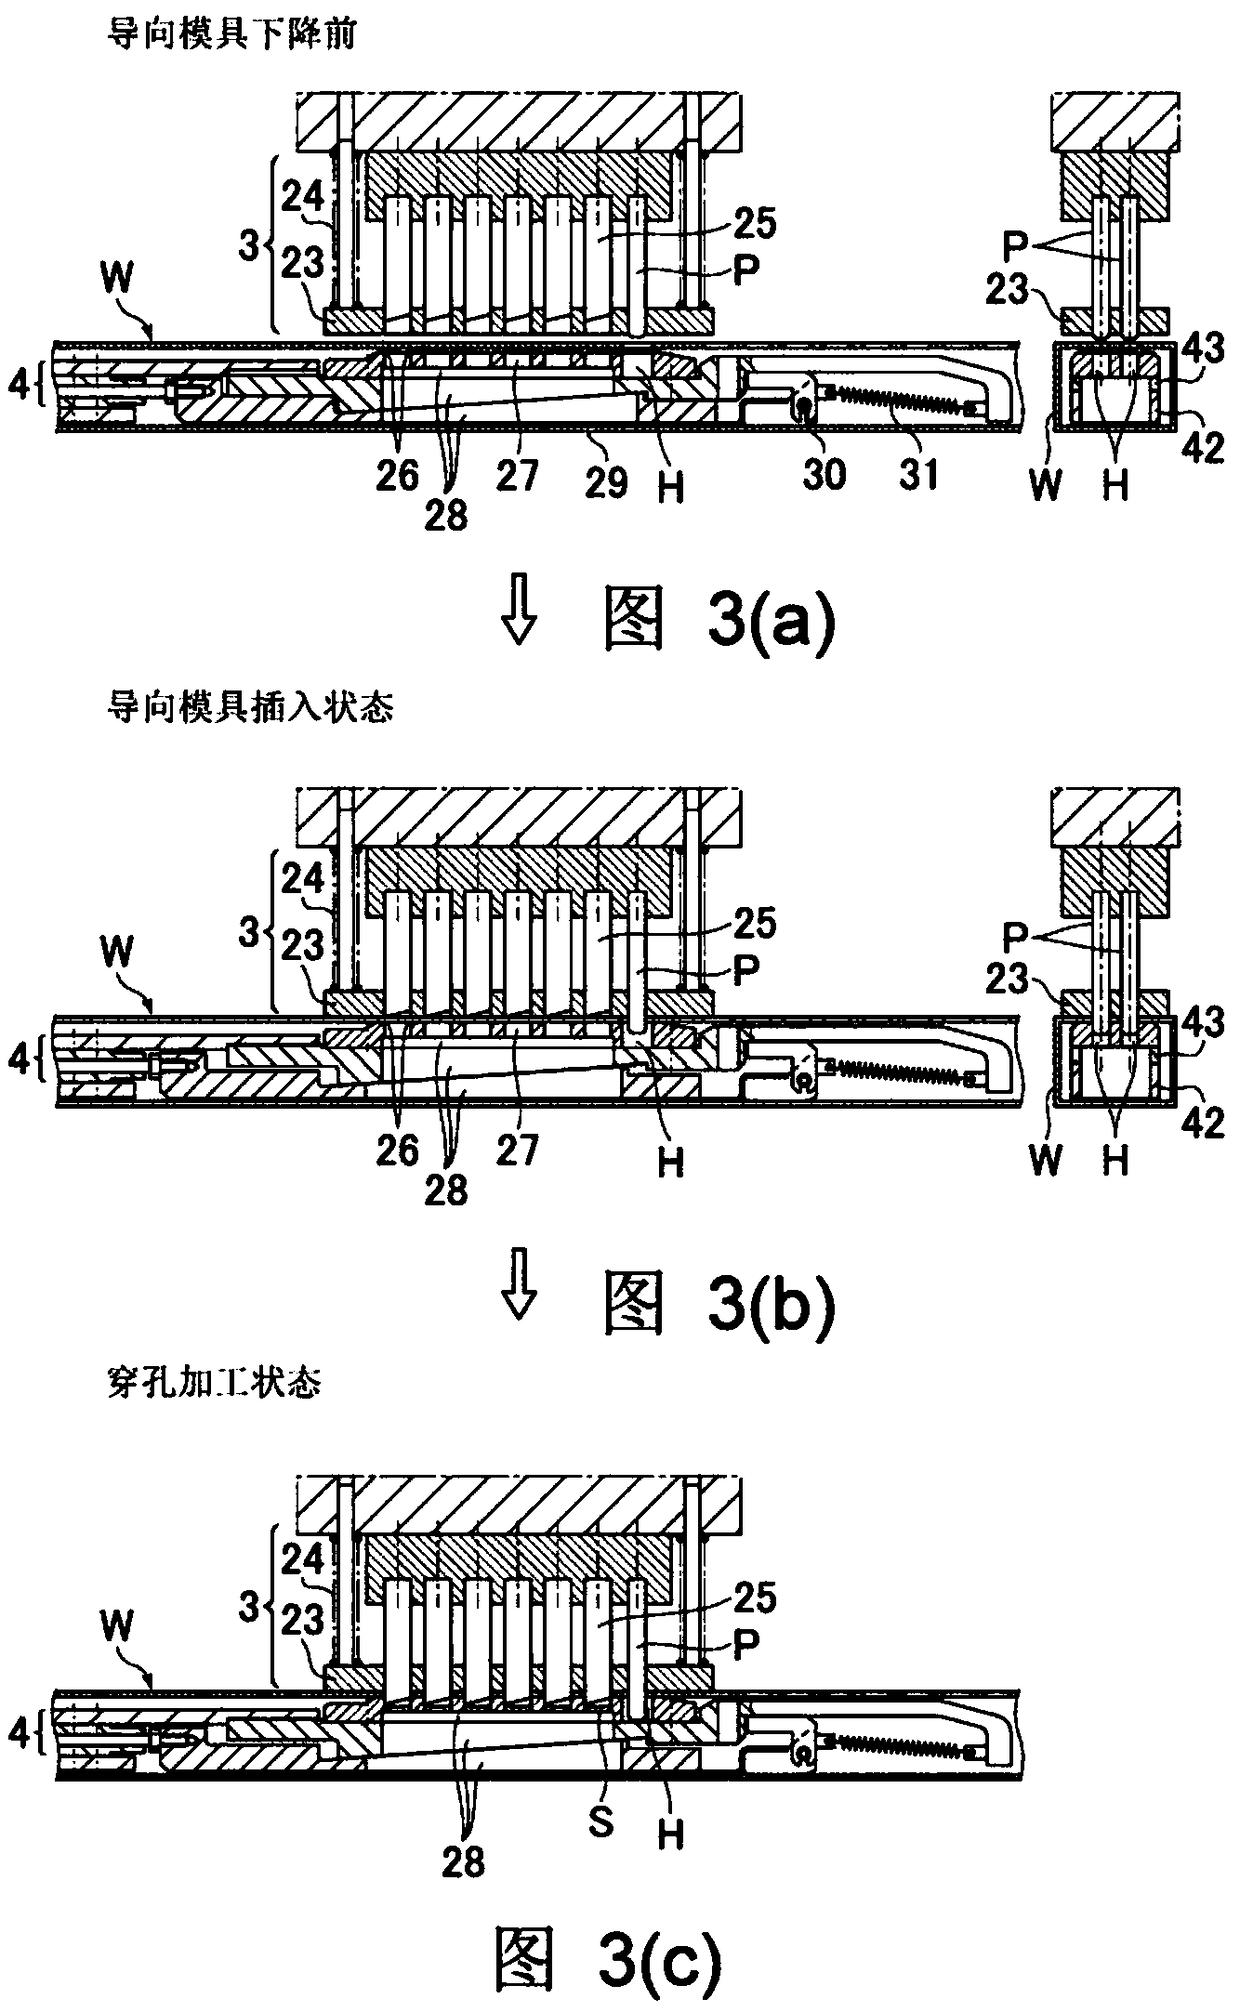 Perforation processing device and processing method for perforated processing waste of cornertube